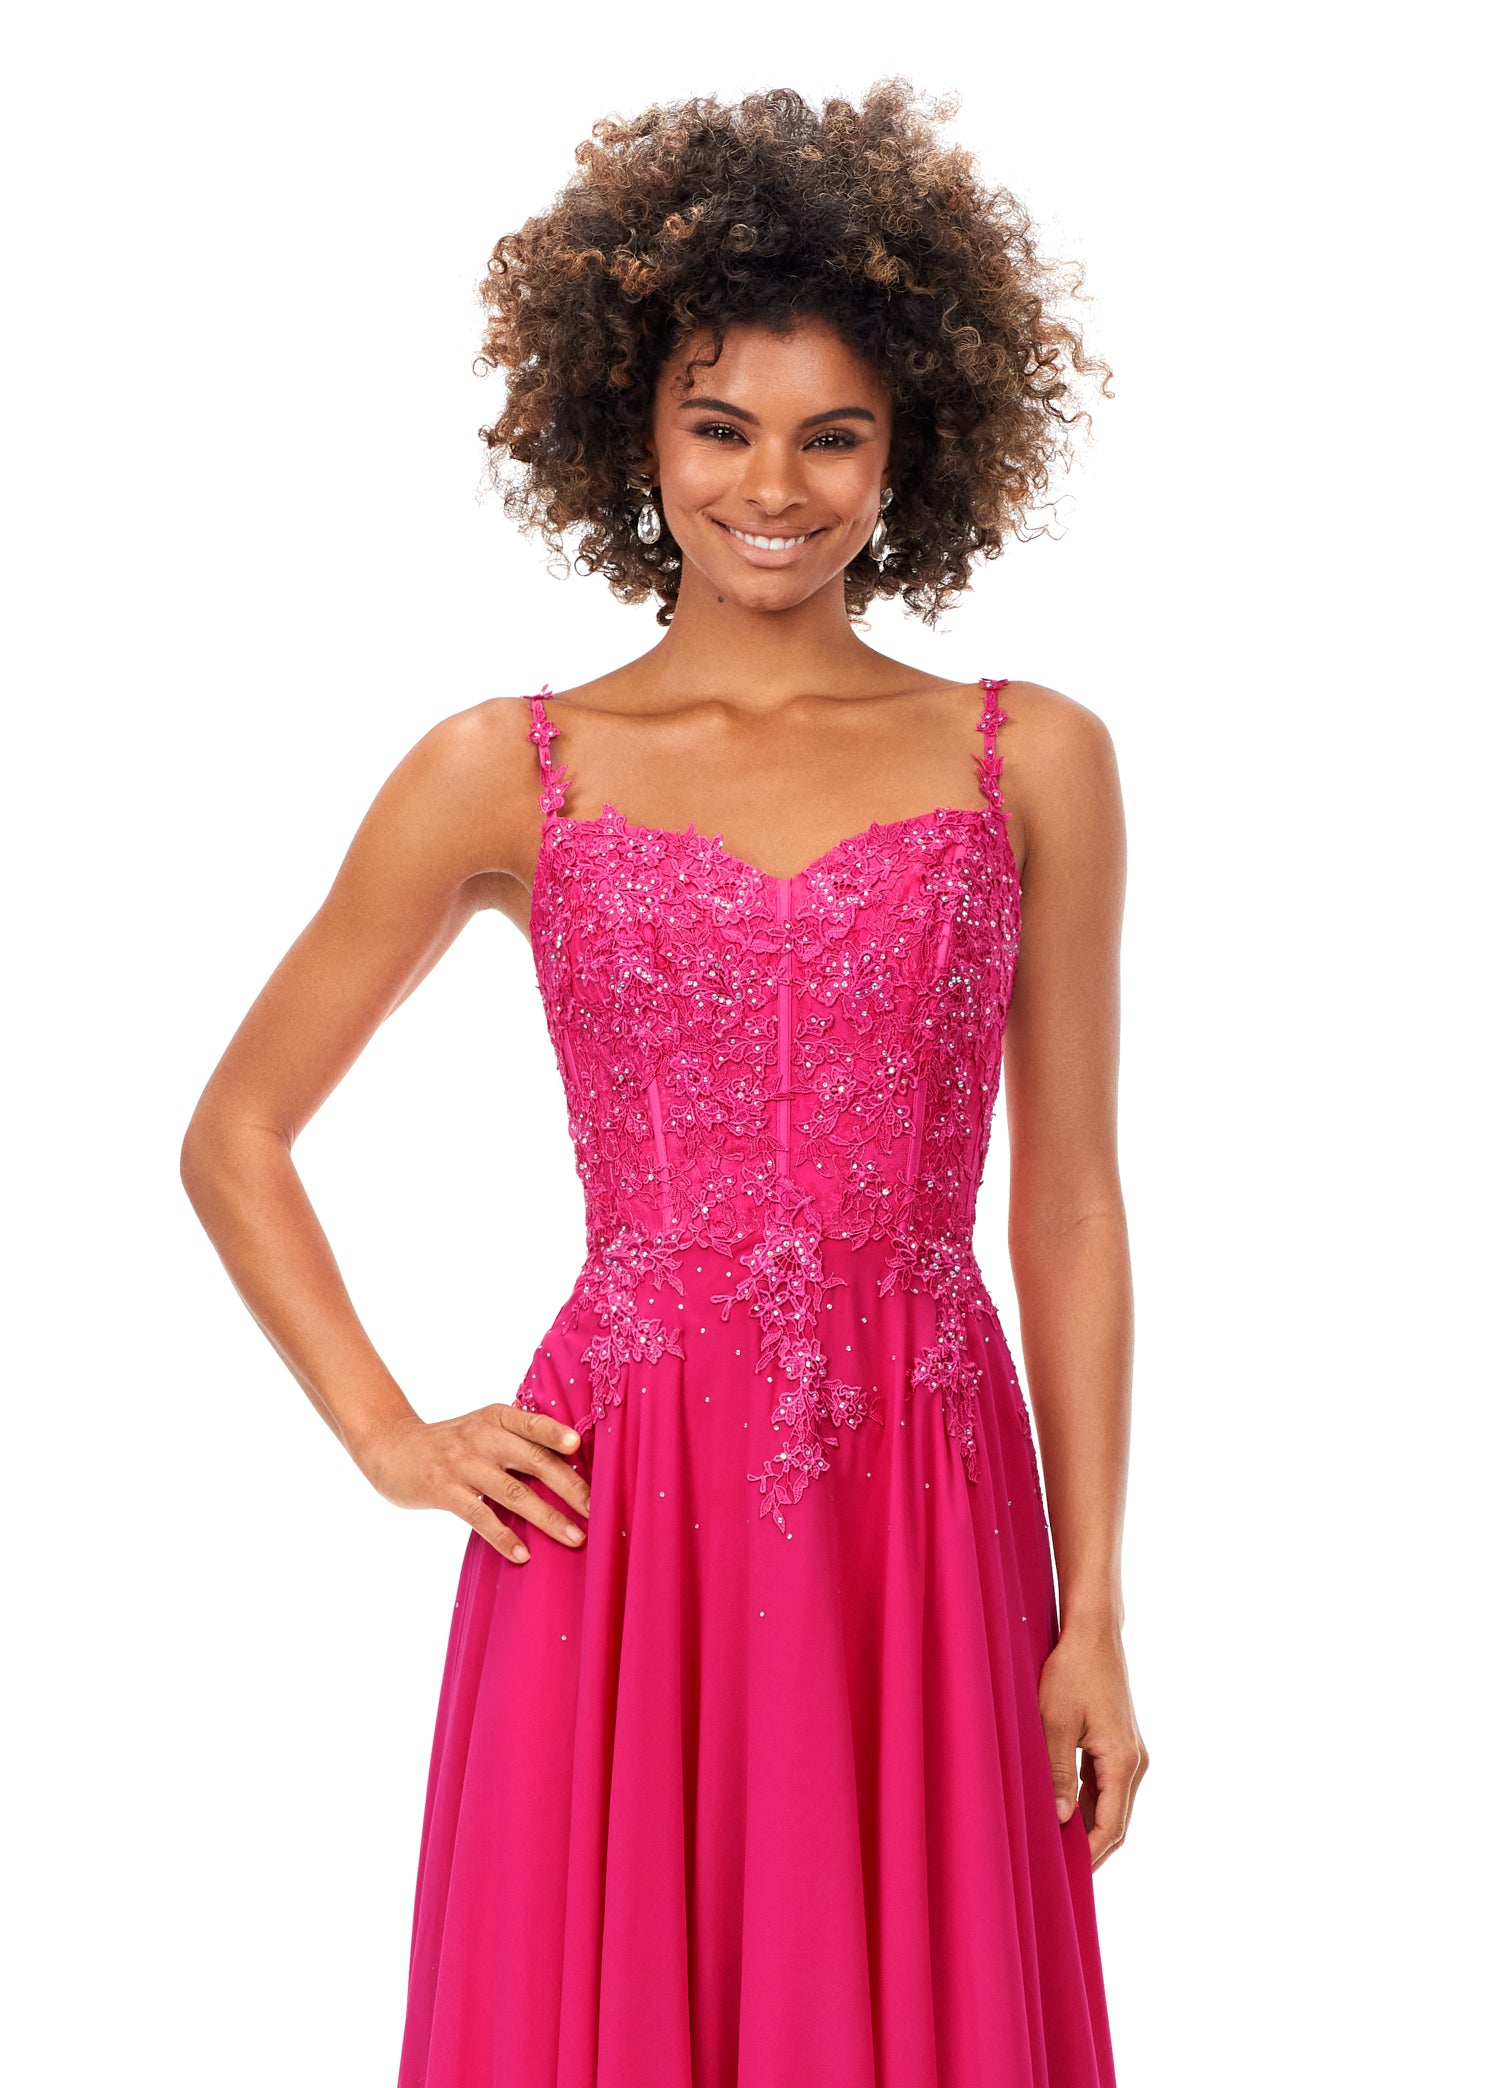 Ashley Lauren 11332 This classic chiffon prom, pageant and evening dress features a sweetheart neckline with spaghetti straps. The bustier on this dress is a corset style with lace appliques throughout. The lace appliques carry down onto the a-line skirt.